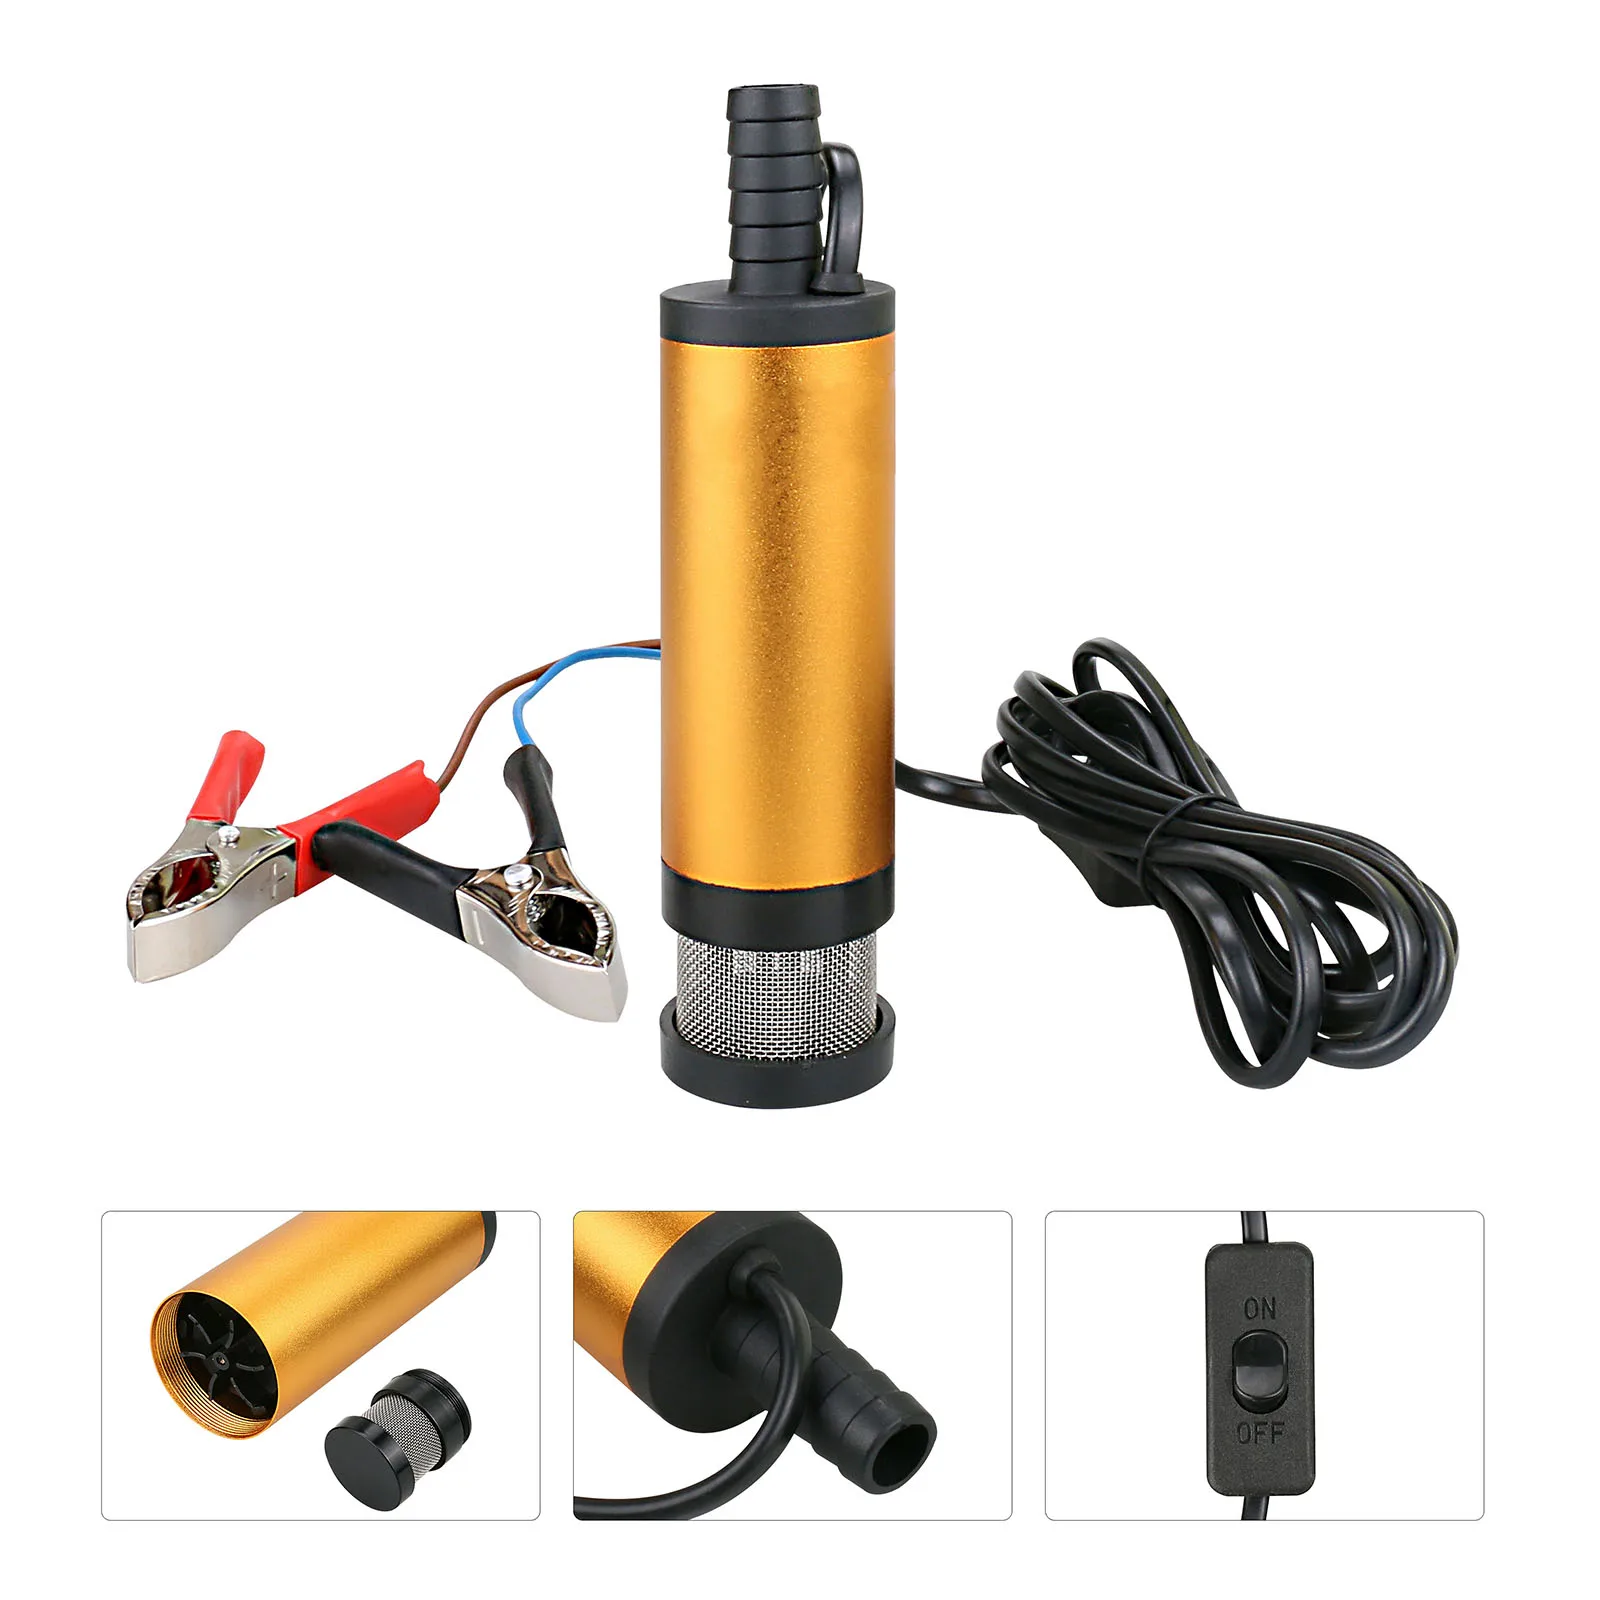 

Mini Diesel Pump DC 12V Transfer Aluminum Alloy Refueling For Car Truck Camping Submersible Motorbike 8500r/min Gold 15Inch